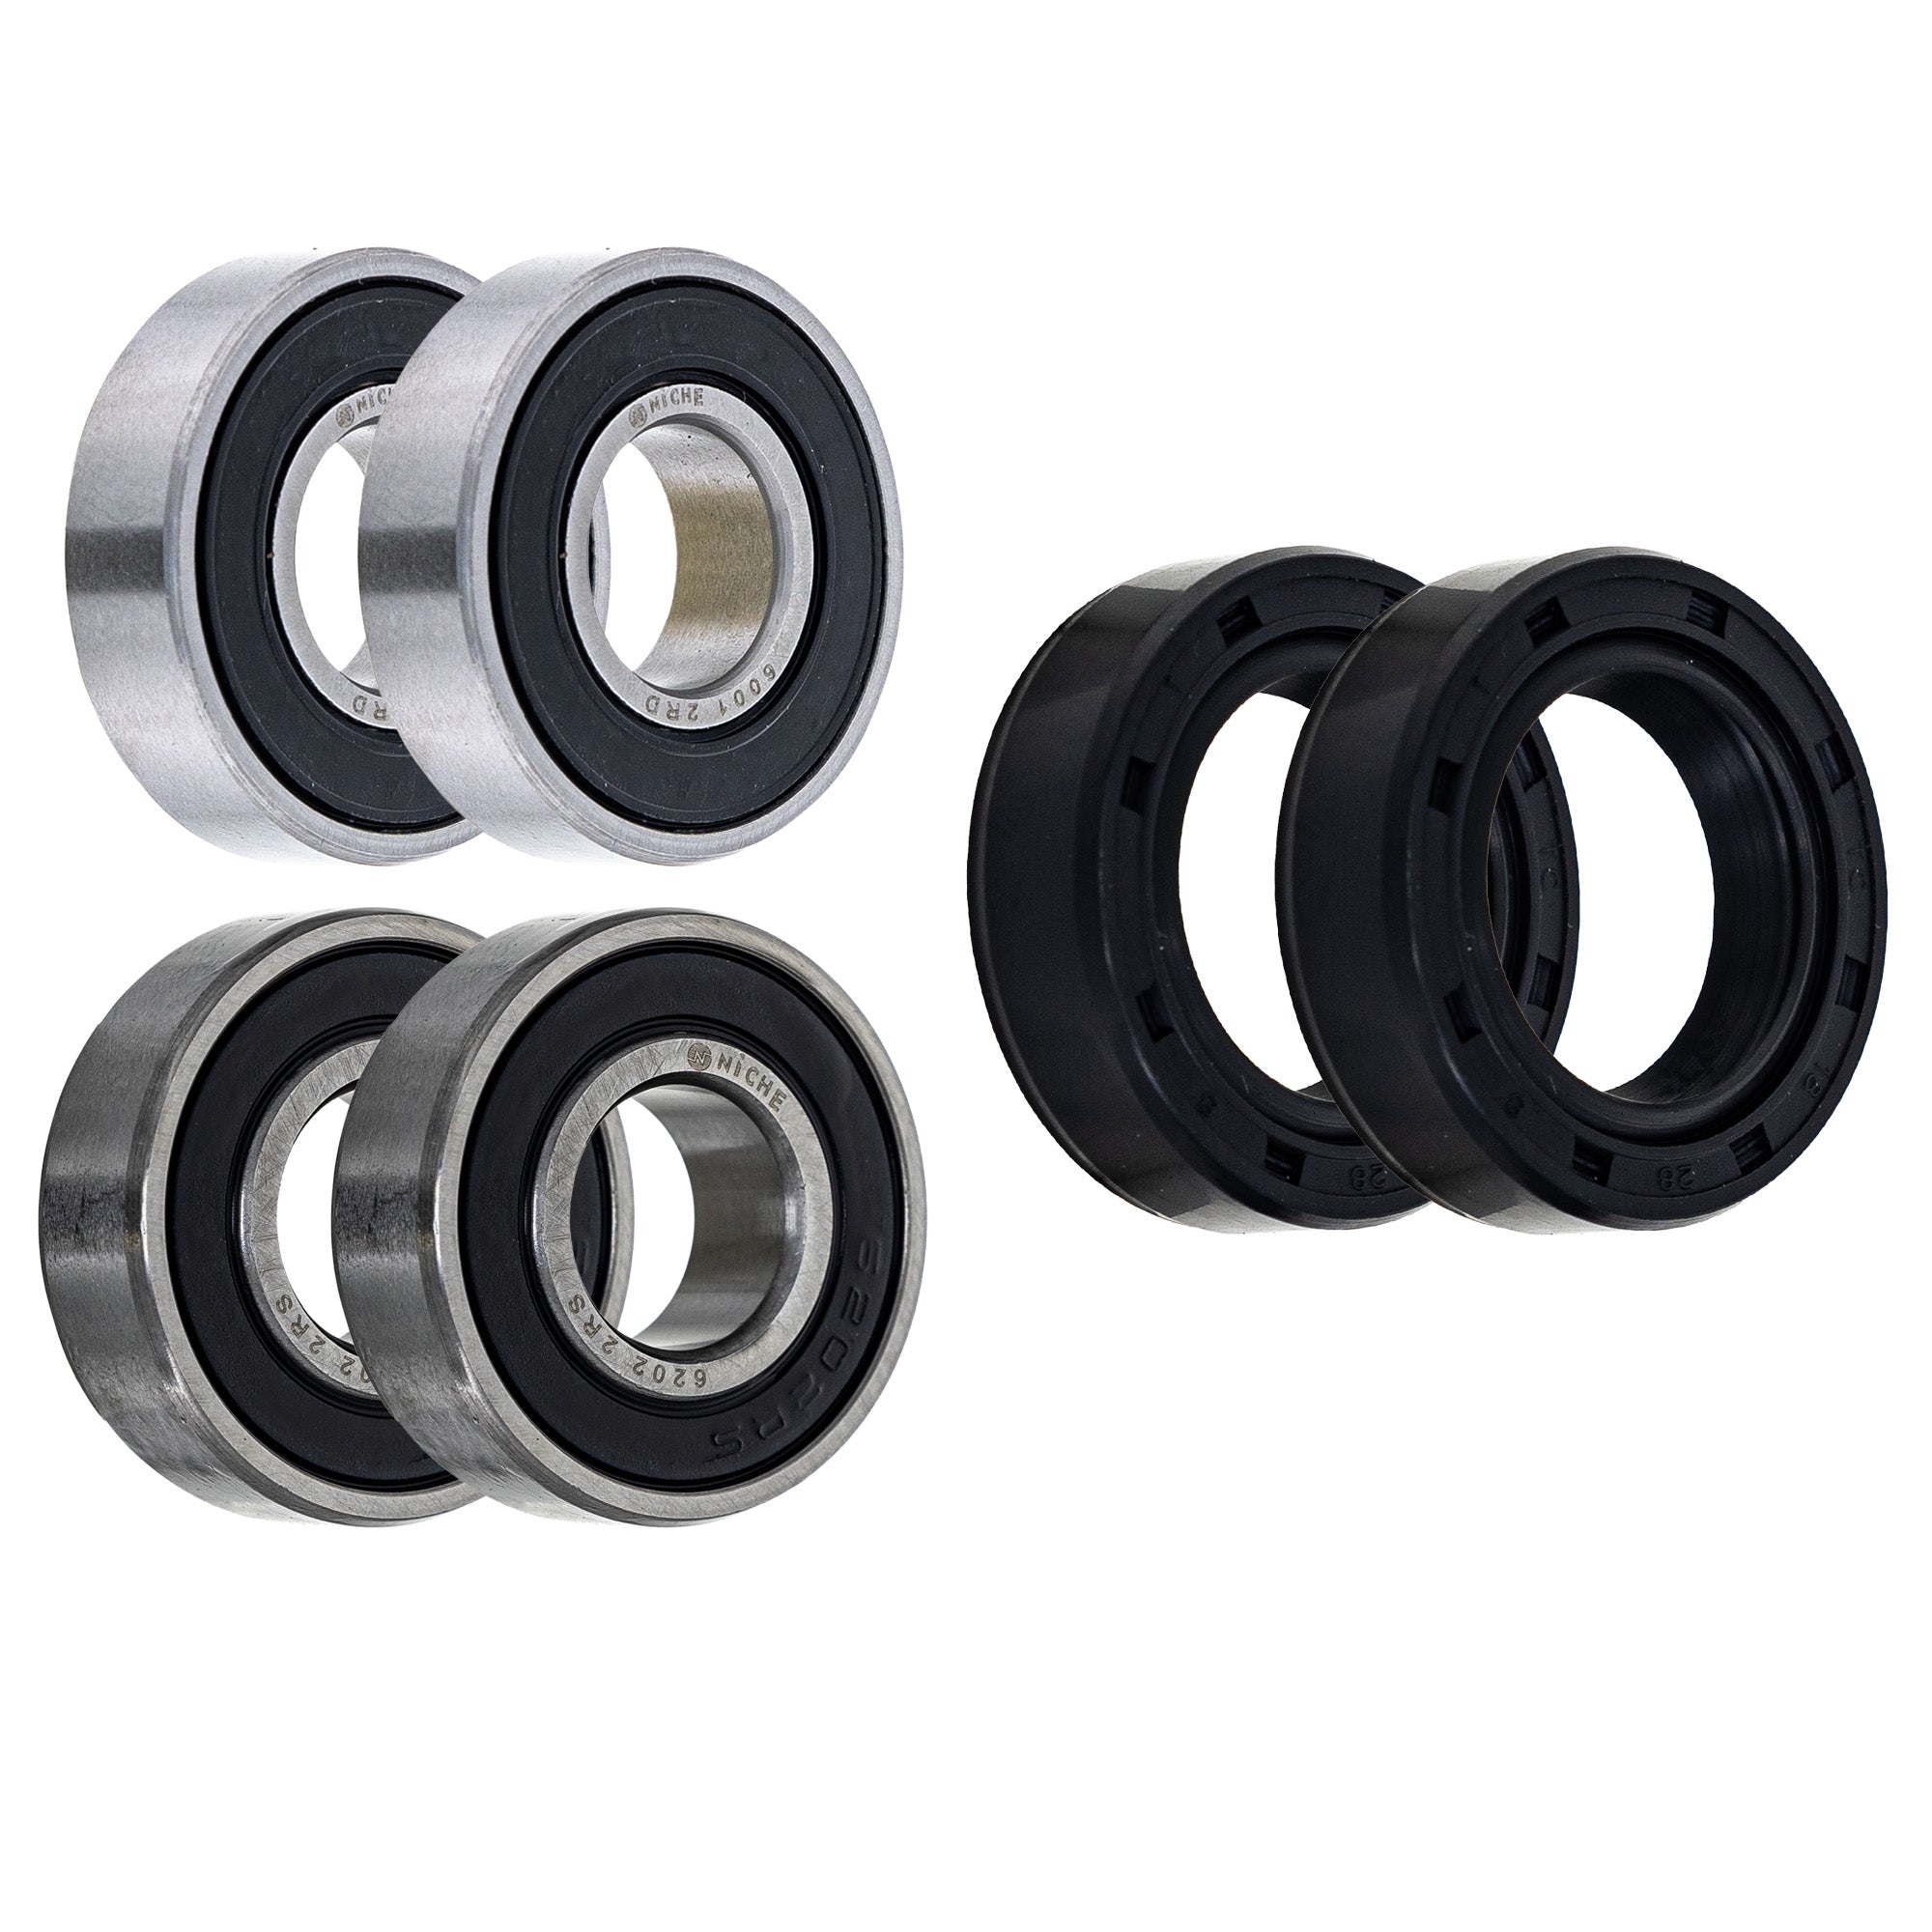 Wheel Bearing Seal Kit for zOTHER Ref No 50 NICHE MK1008781